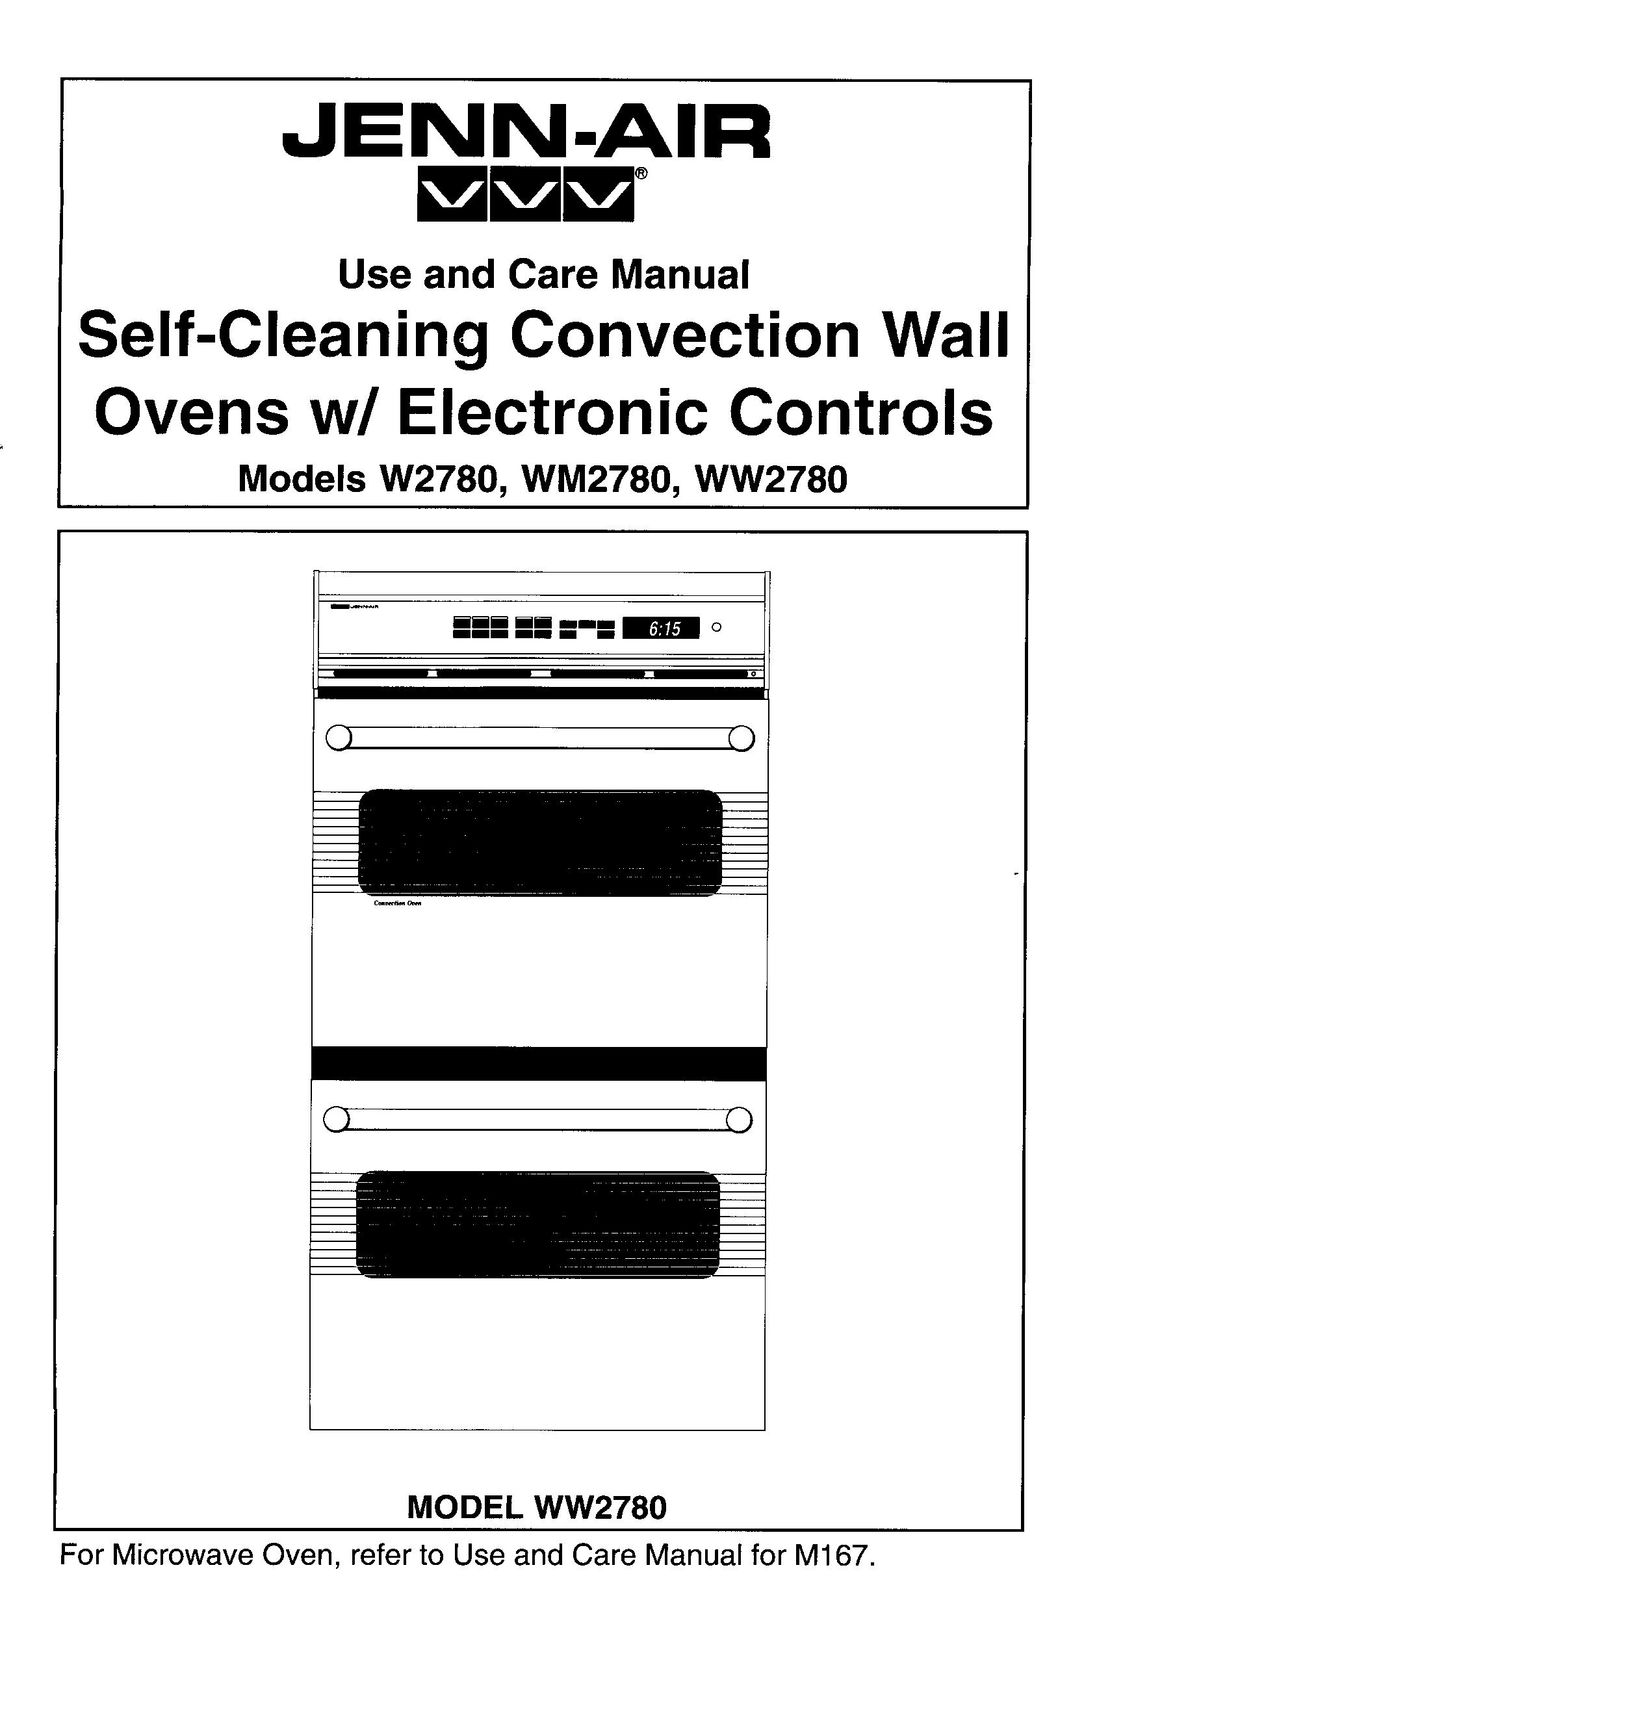 Jenn-Air W2780 Convection Oven User Manual